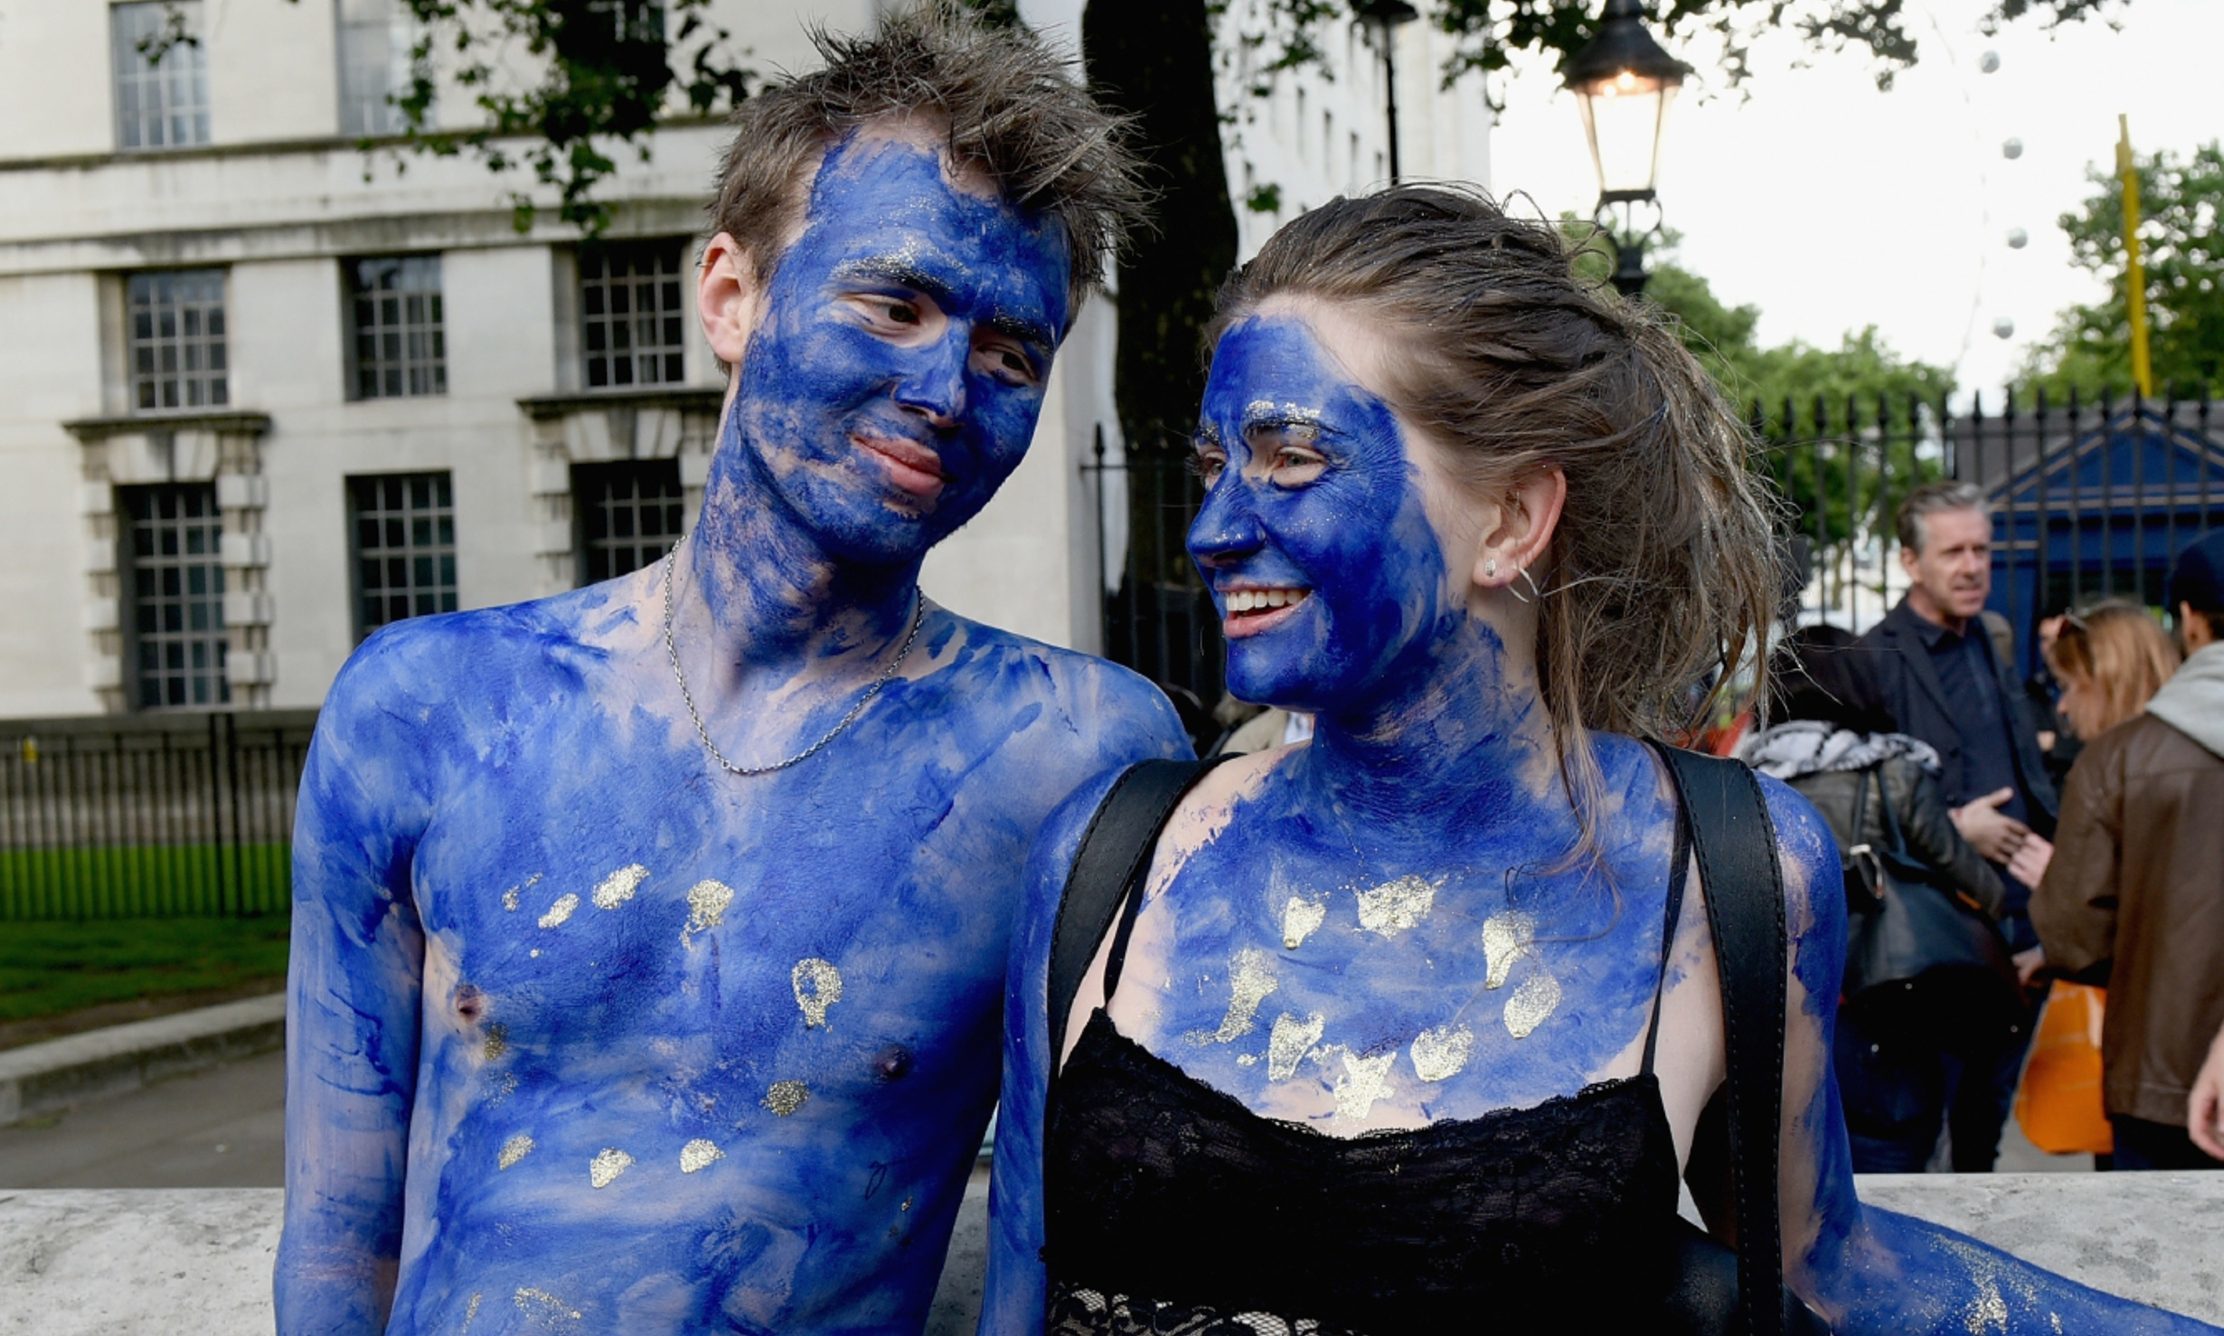 A young couple painted as EU flags protest outside Downing Street against the United Kingdom's decision to leave the EU.